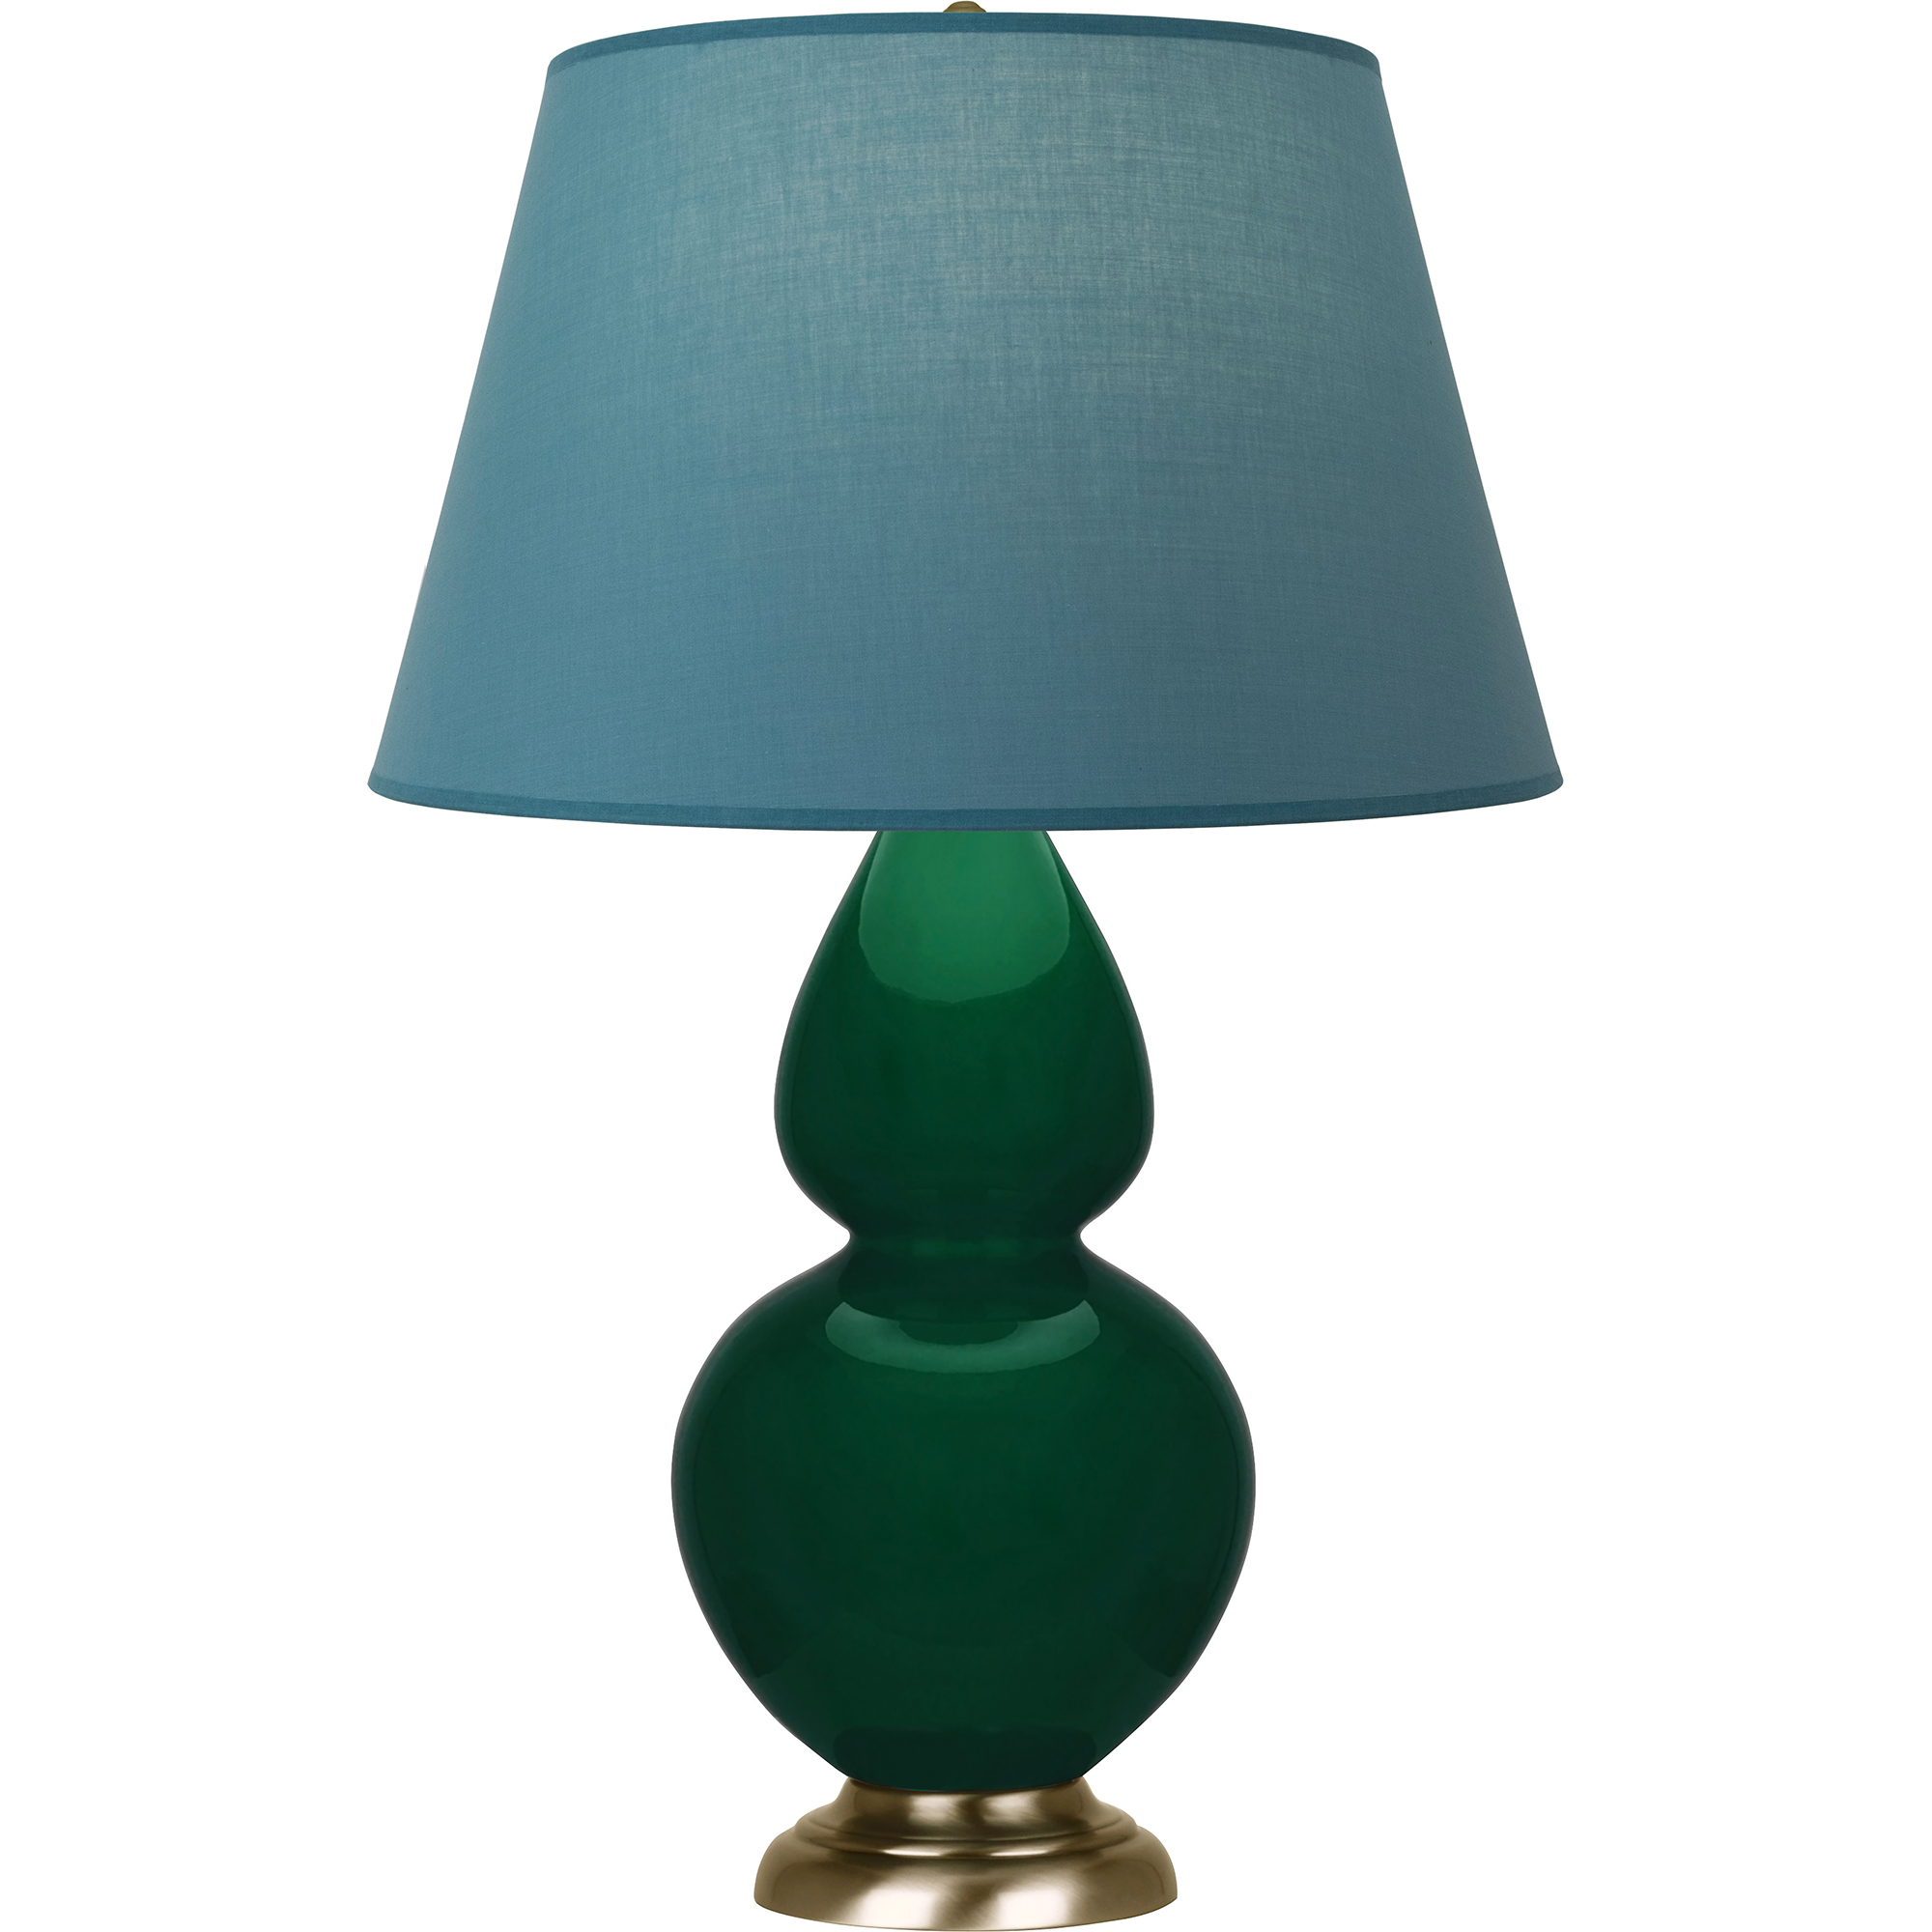 Double Gourd Table Lamp Style #JU20B